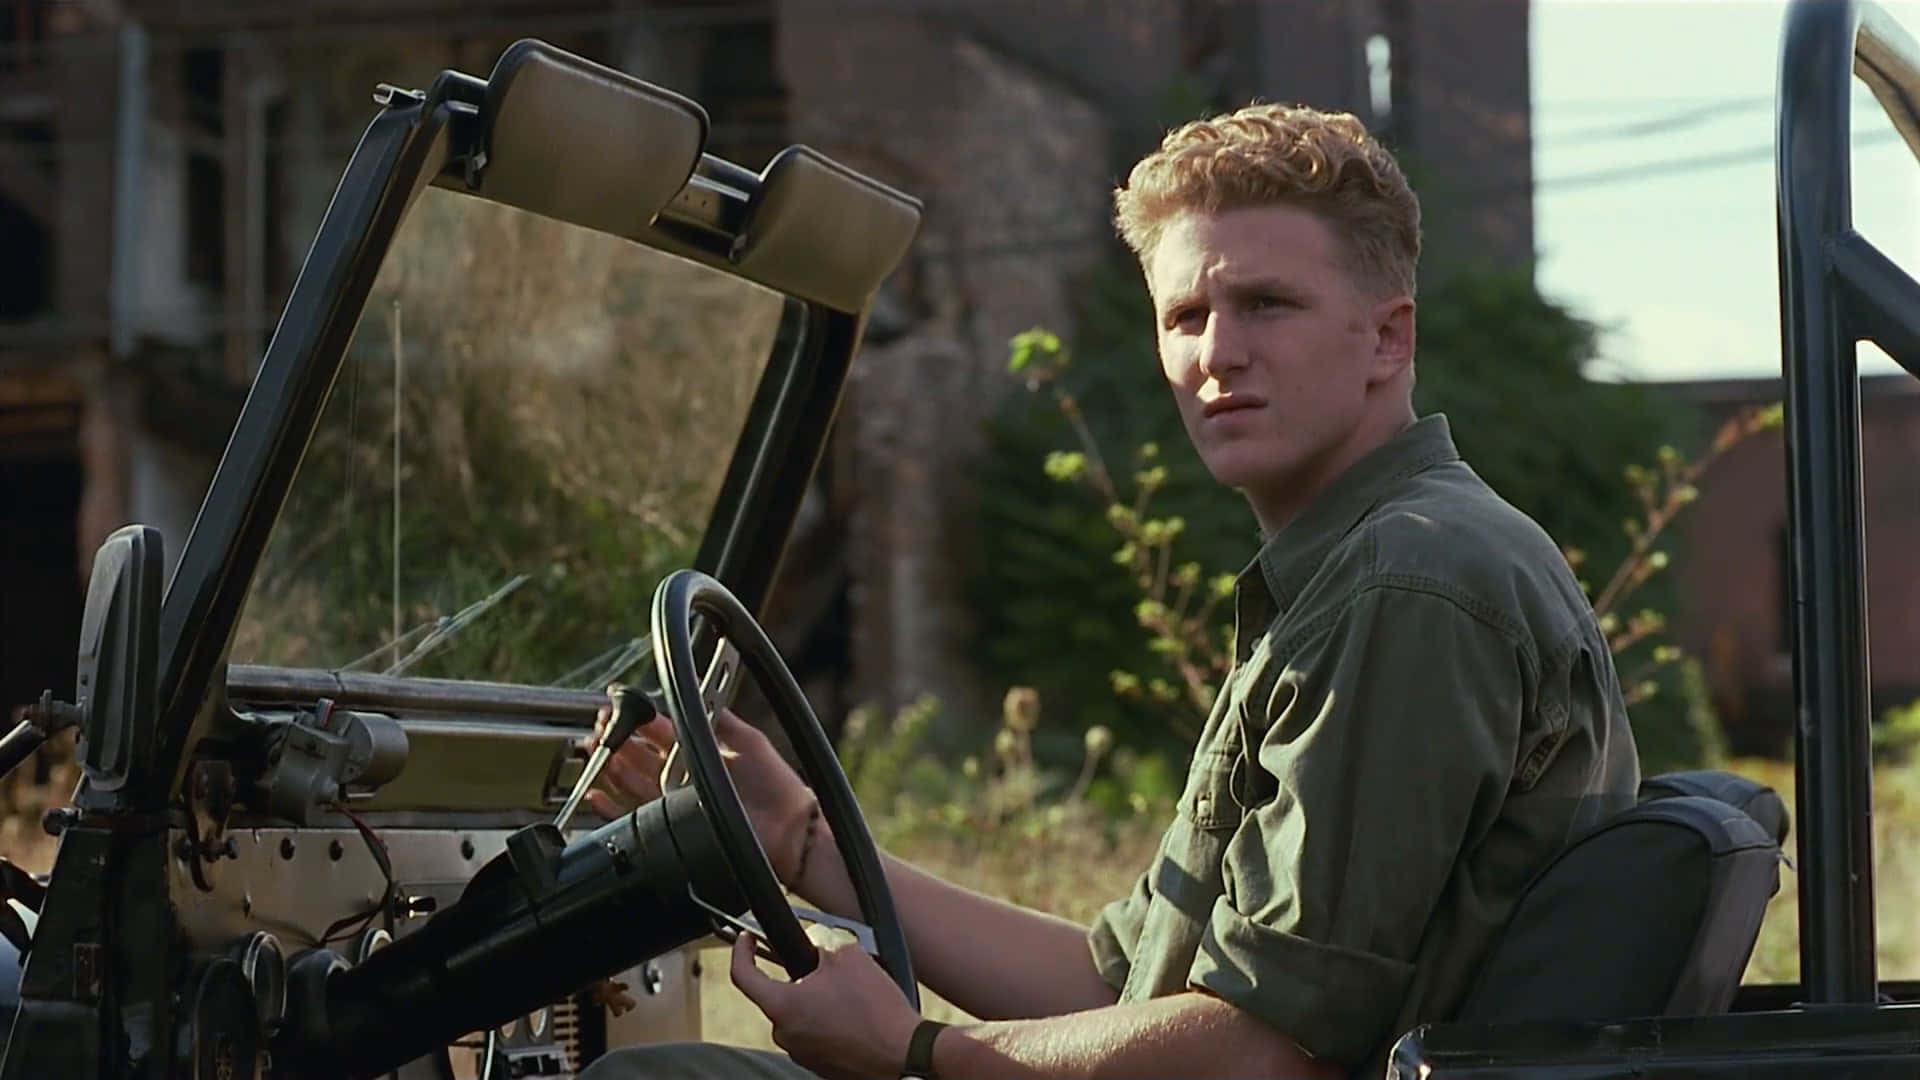 Michael Rapaport in “Atypical” Wallpaper